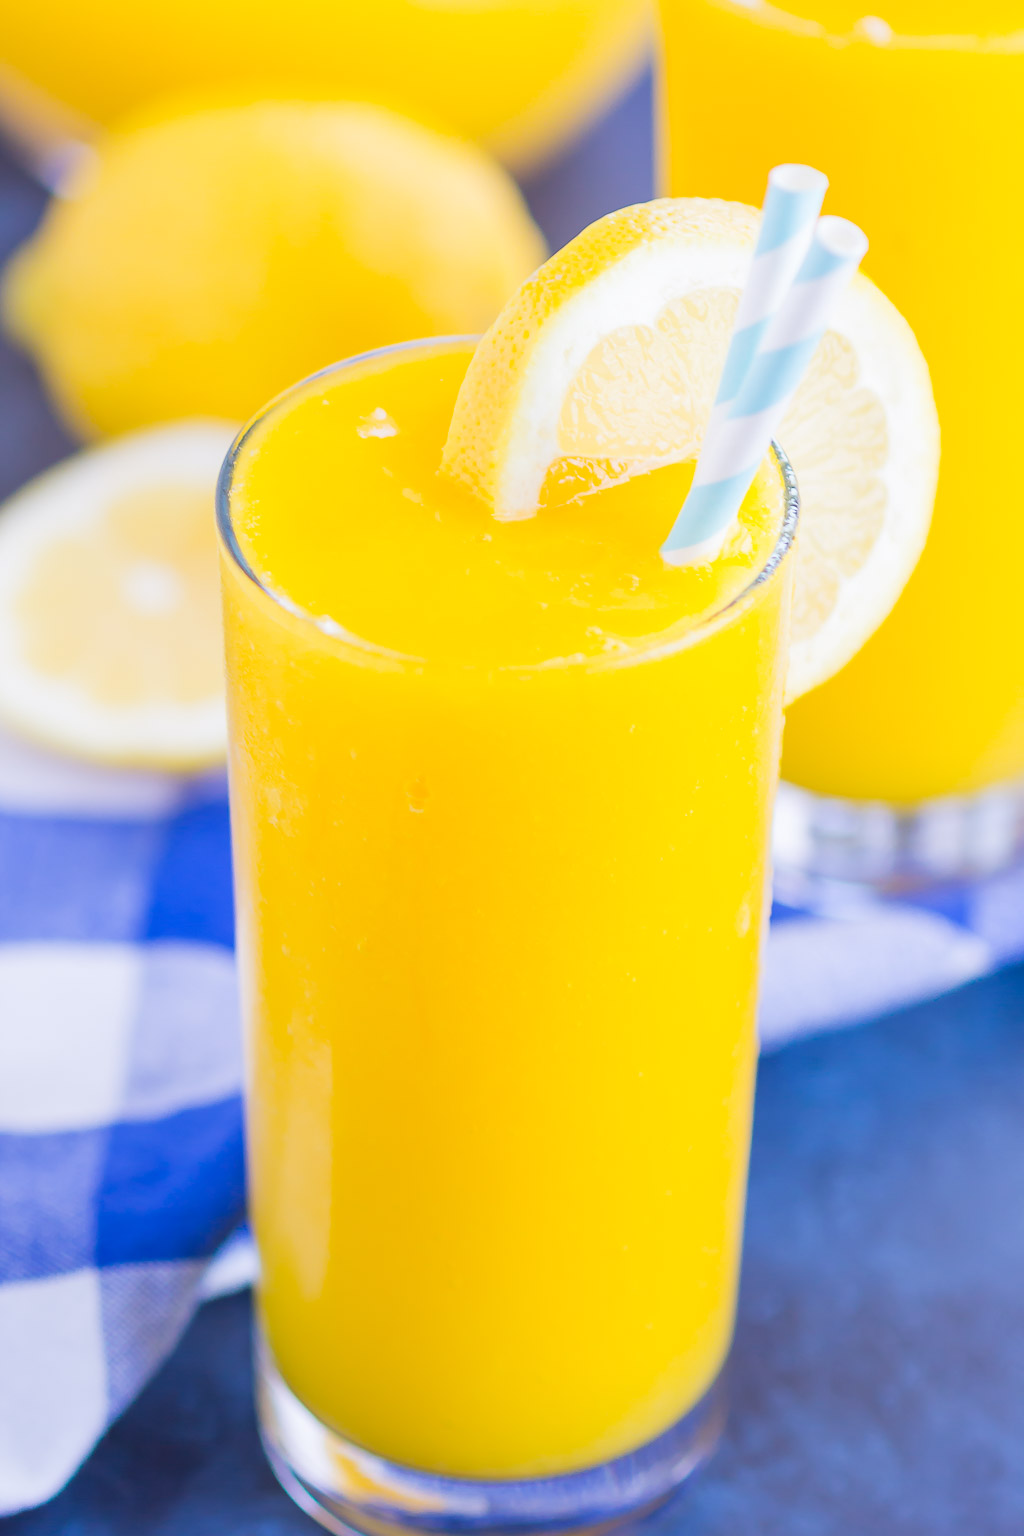 Frozen Mango Lemonade is a delicious way to beat the summer heat. With just four ingredients and ready in less than 5 minutes, you'll love the cool and creamy flavor of sweet mango and tart lemons!